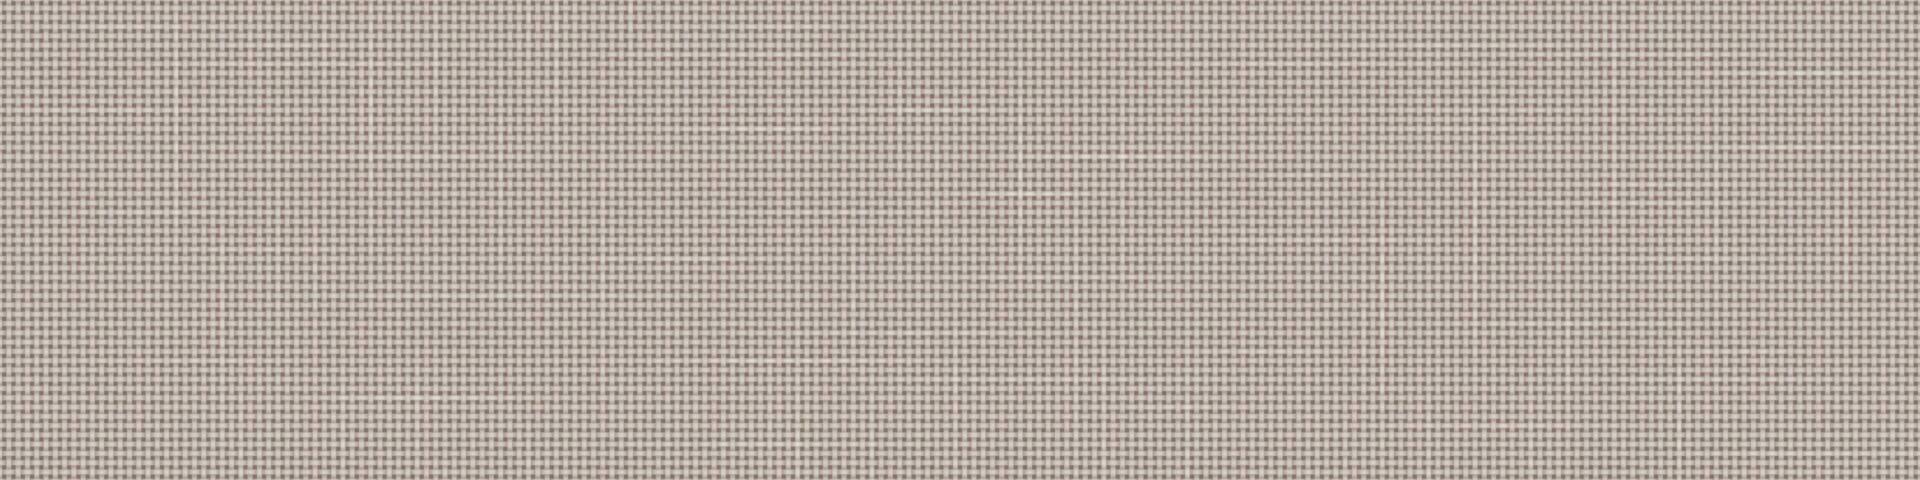 Pattern of woven linen or cotton fabric vector